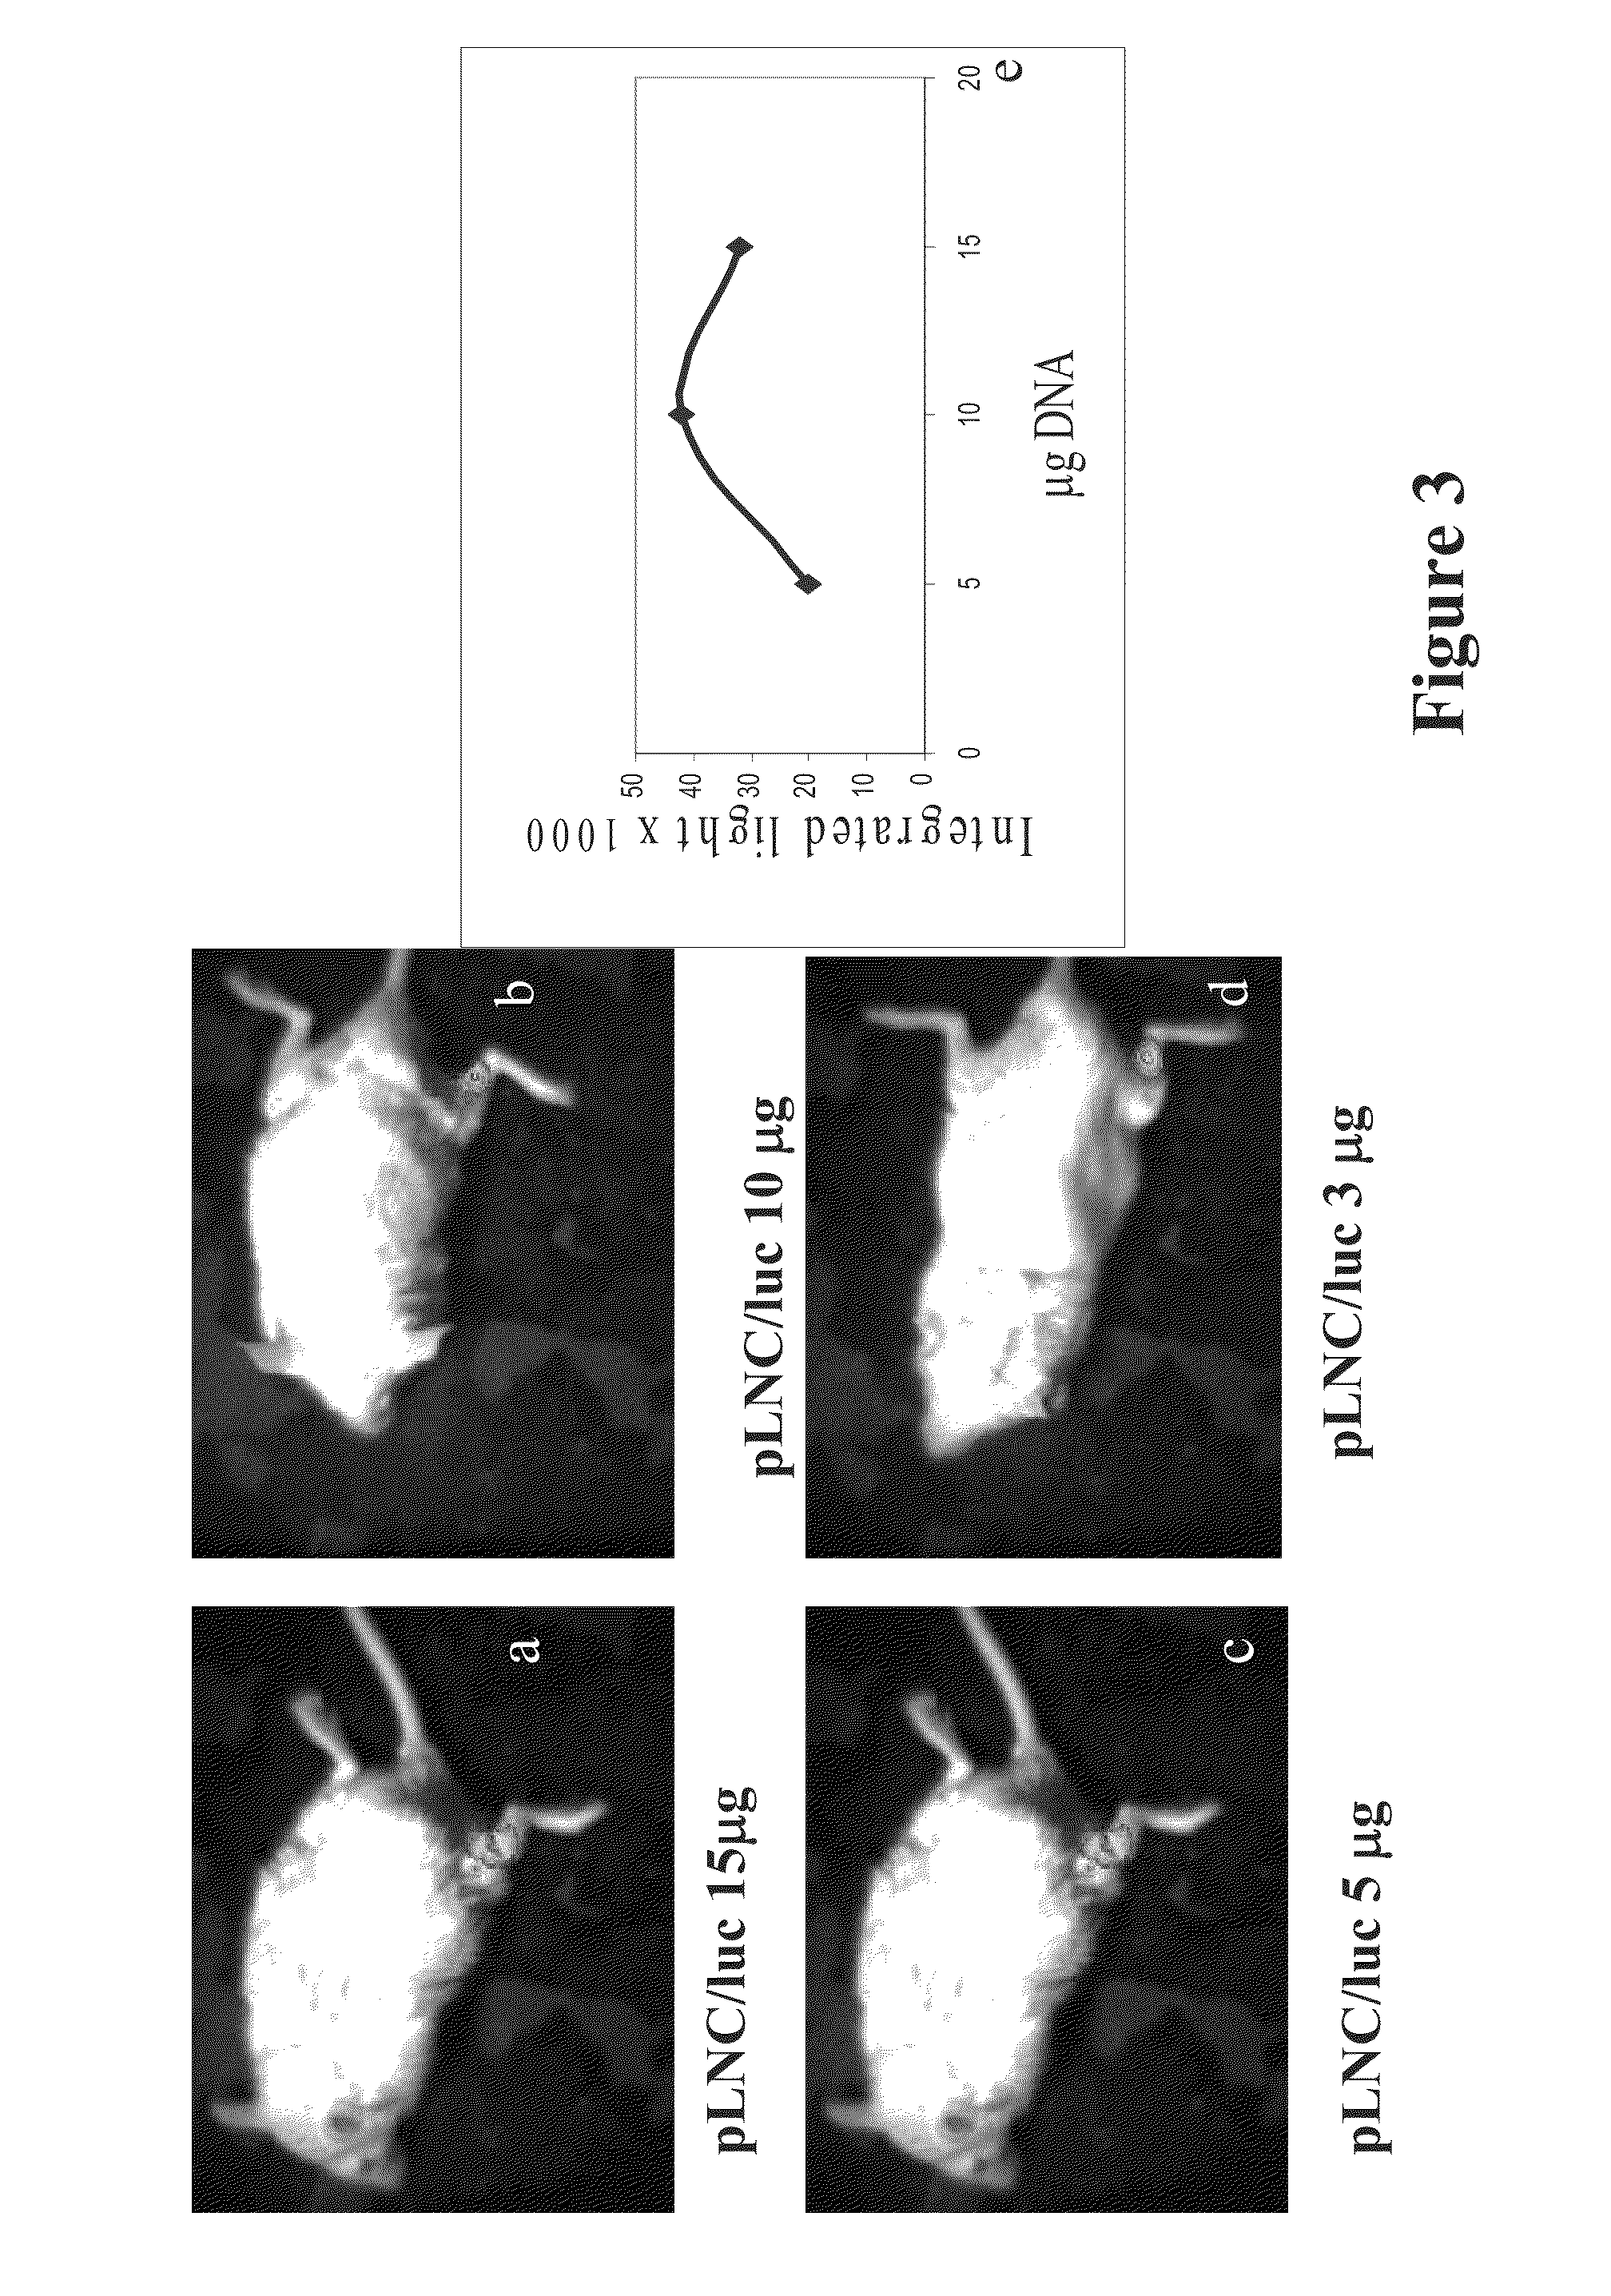 Controlled laser treatment for non-invasive tissue alteration, treatment and diagnostics with minimal collateral damage